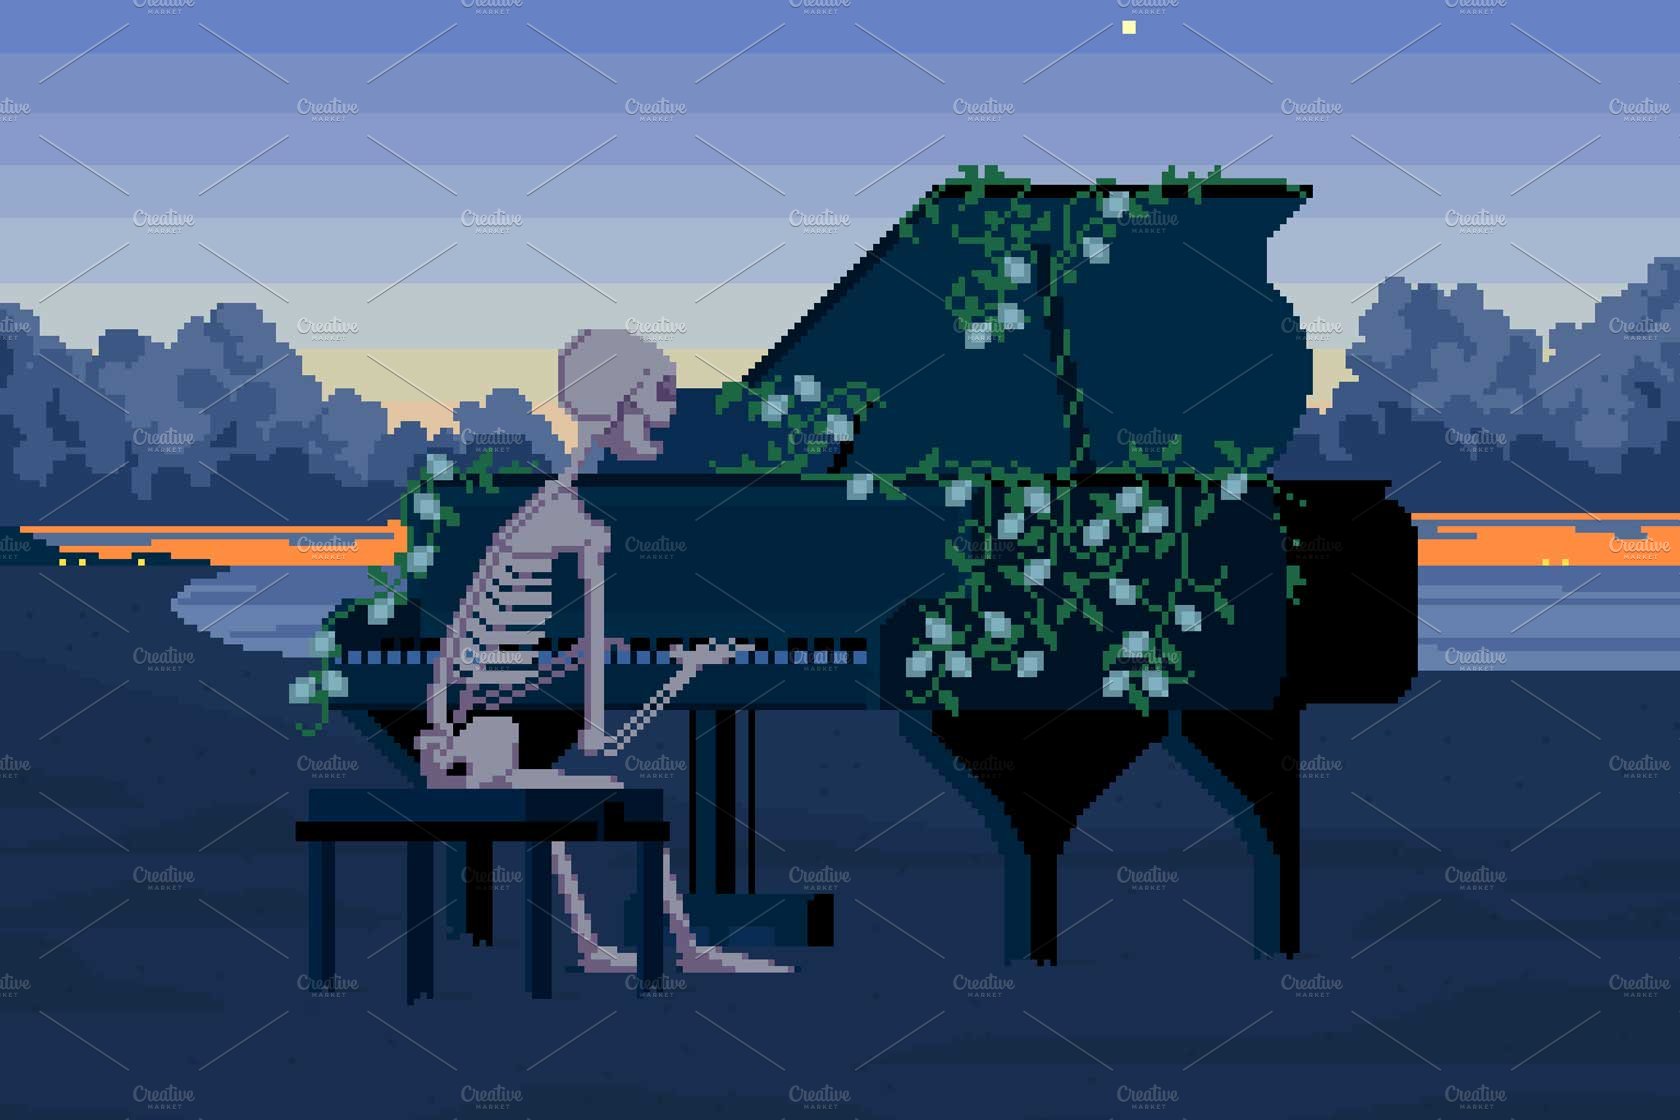 The Skinny Pianist cover image.